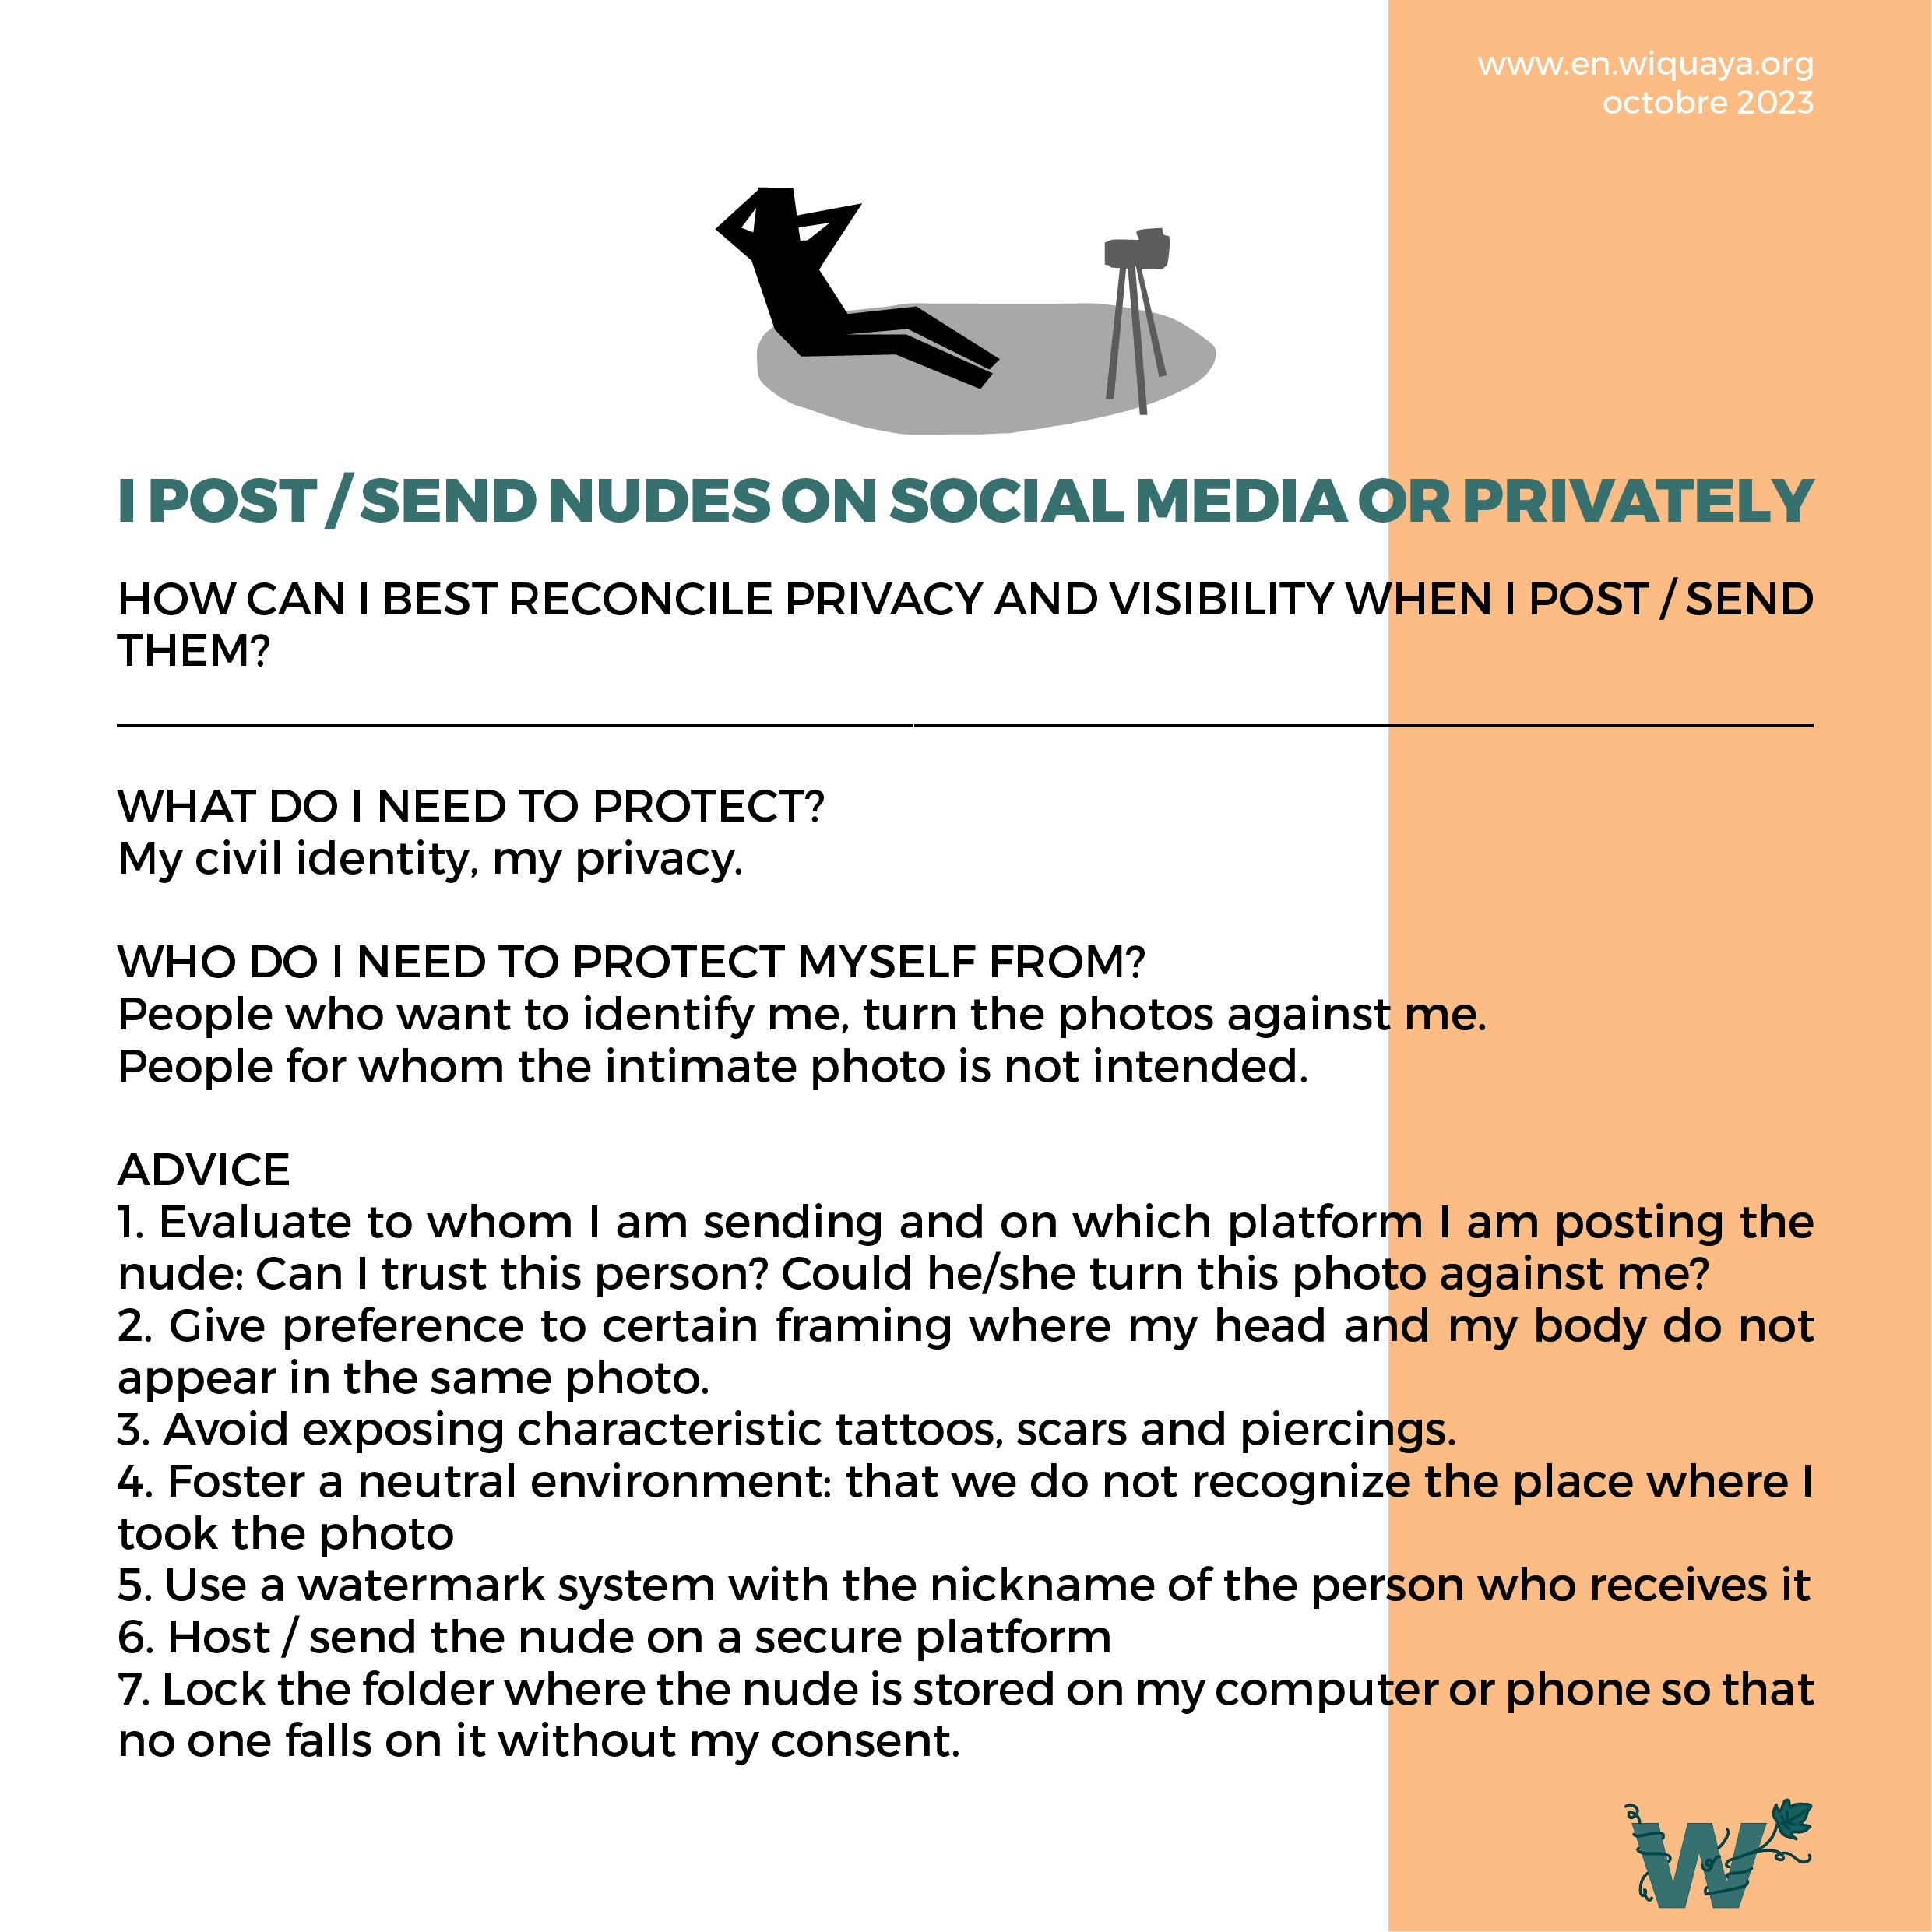 Help sheet I post/send nudes on social media or privately